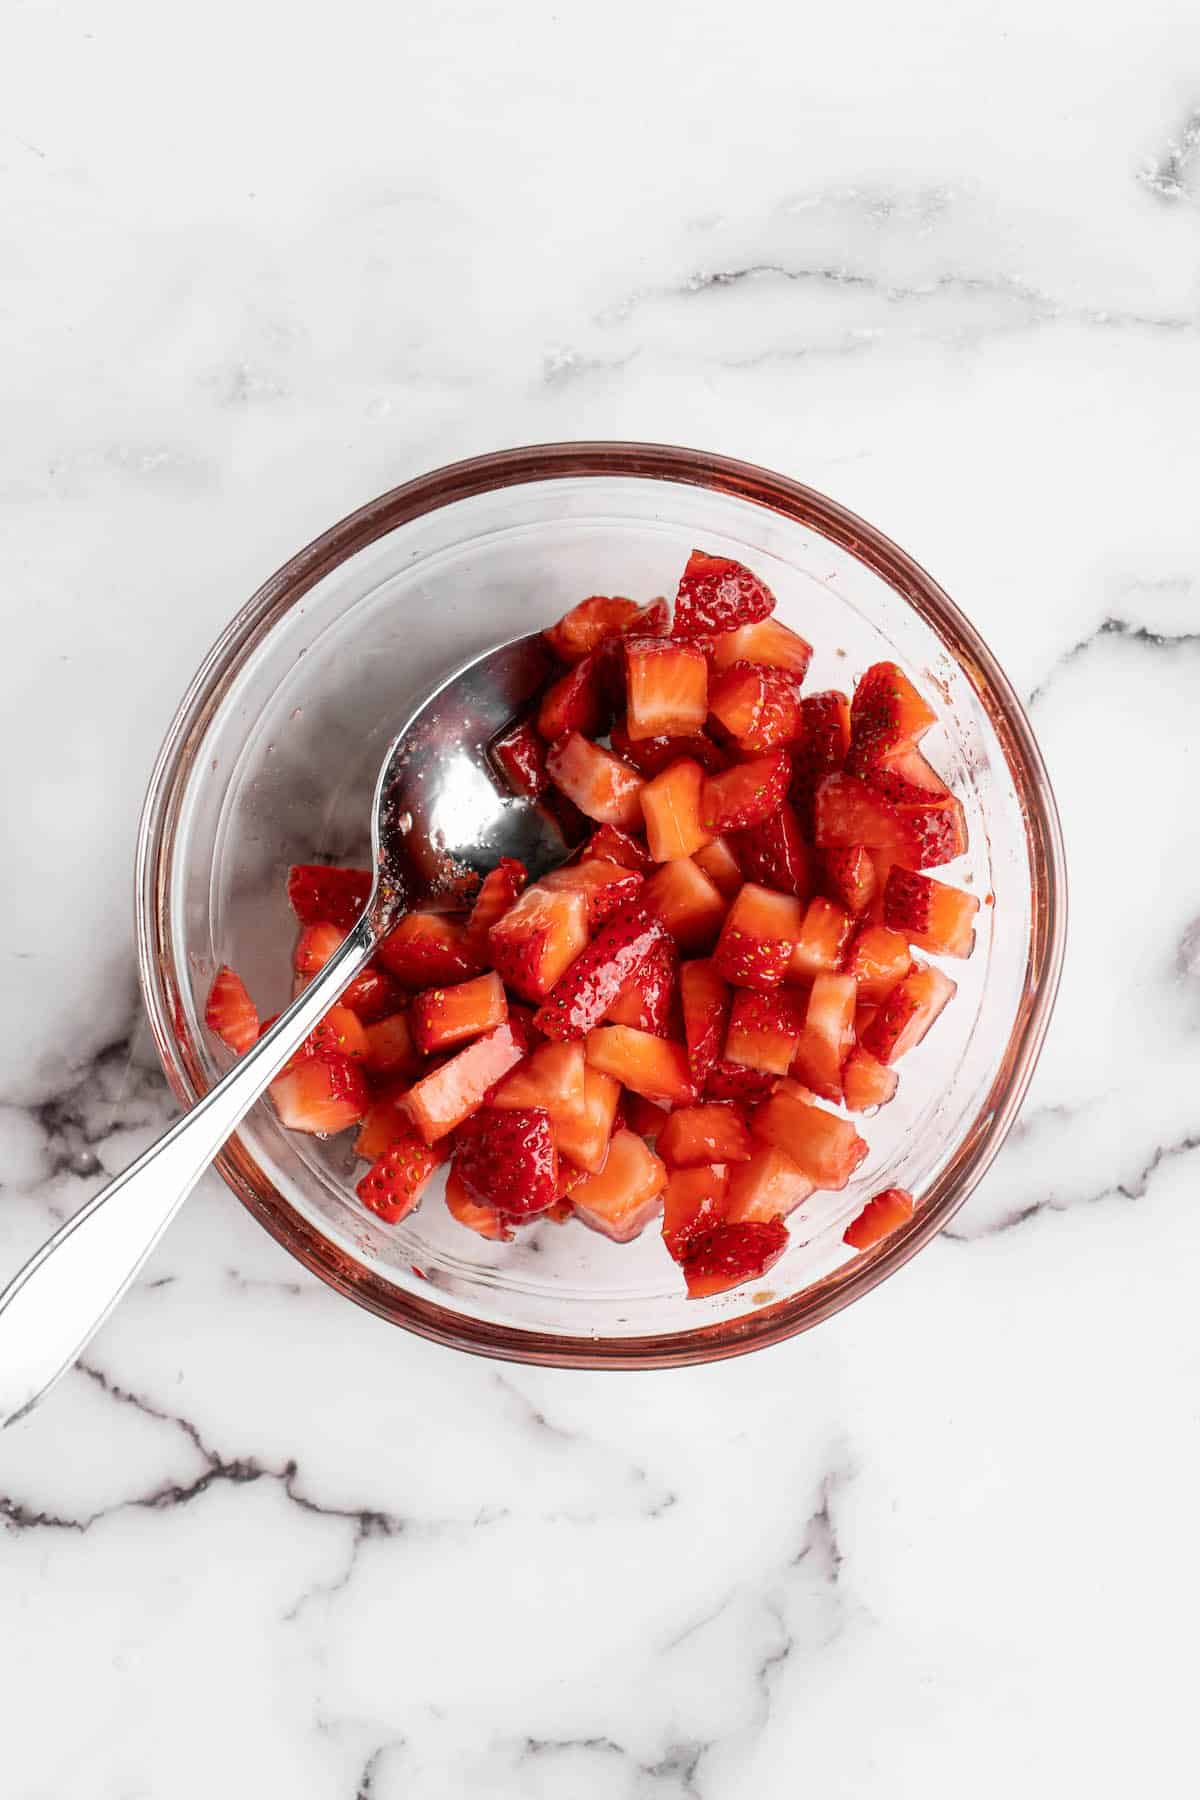 Overhead view of macerated strawberries in glass bowl with spoon